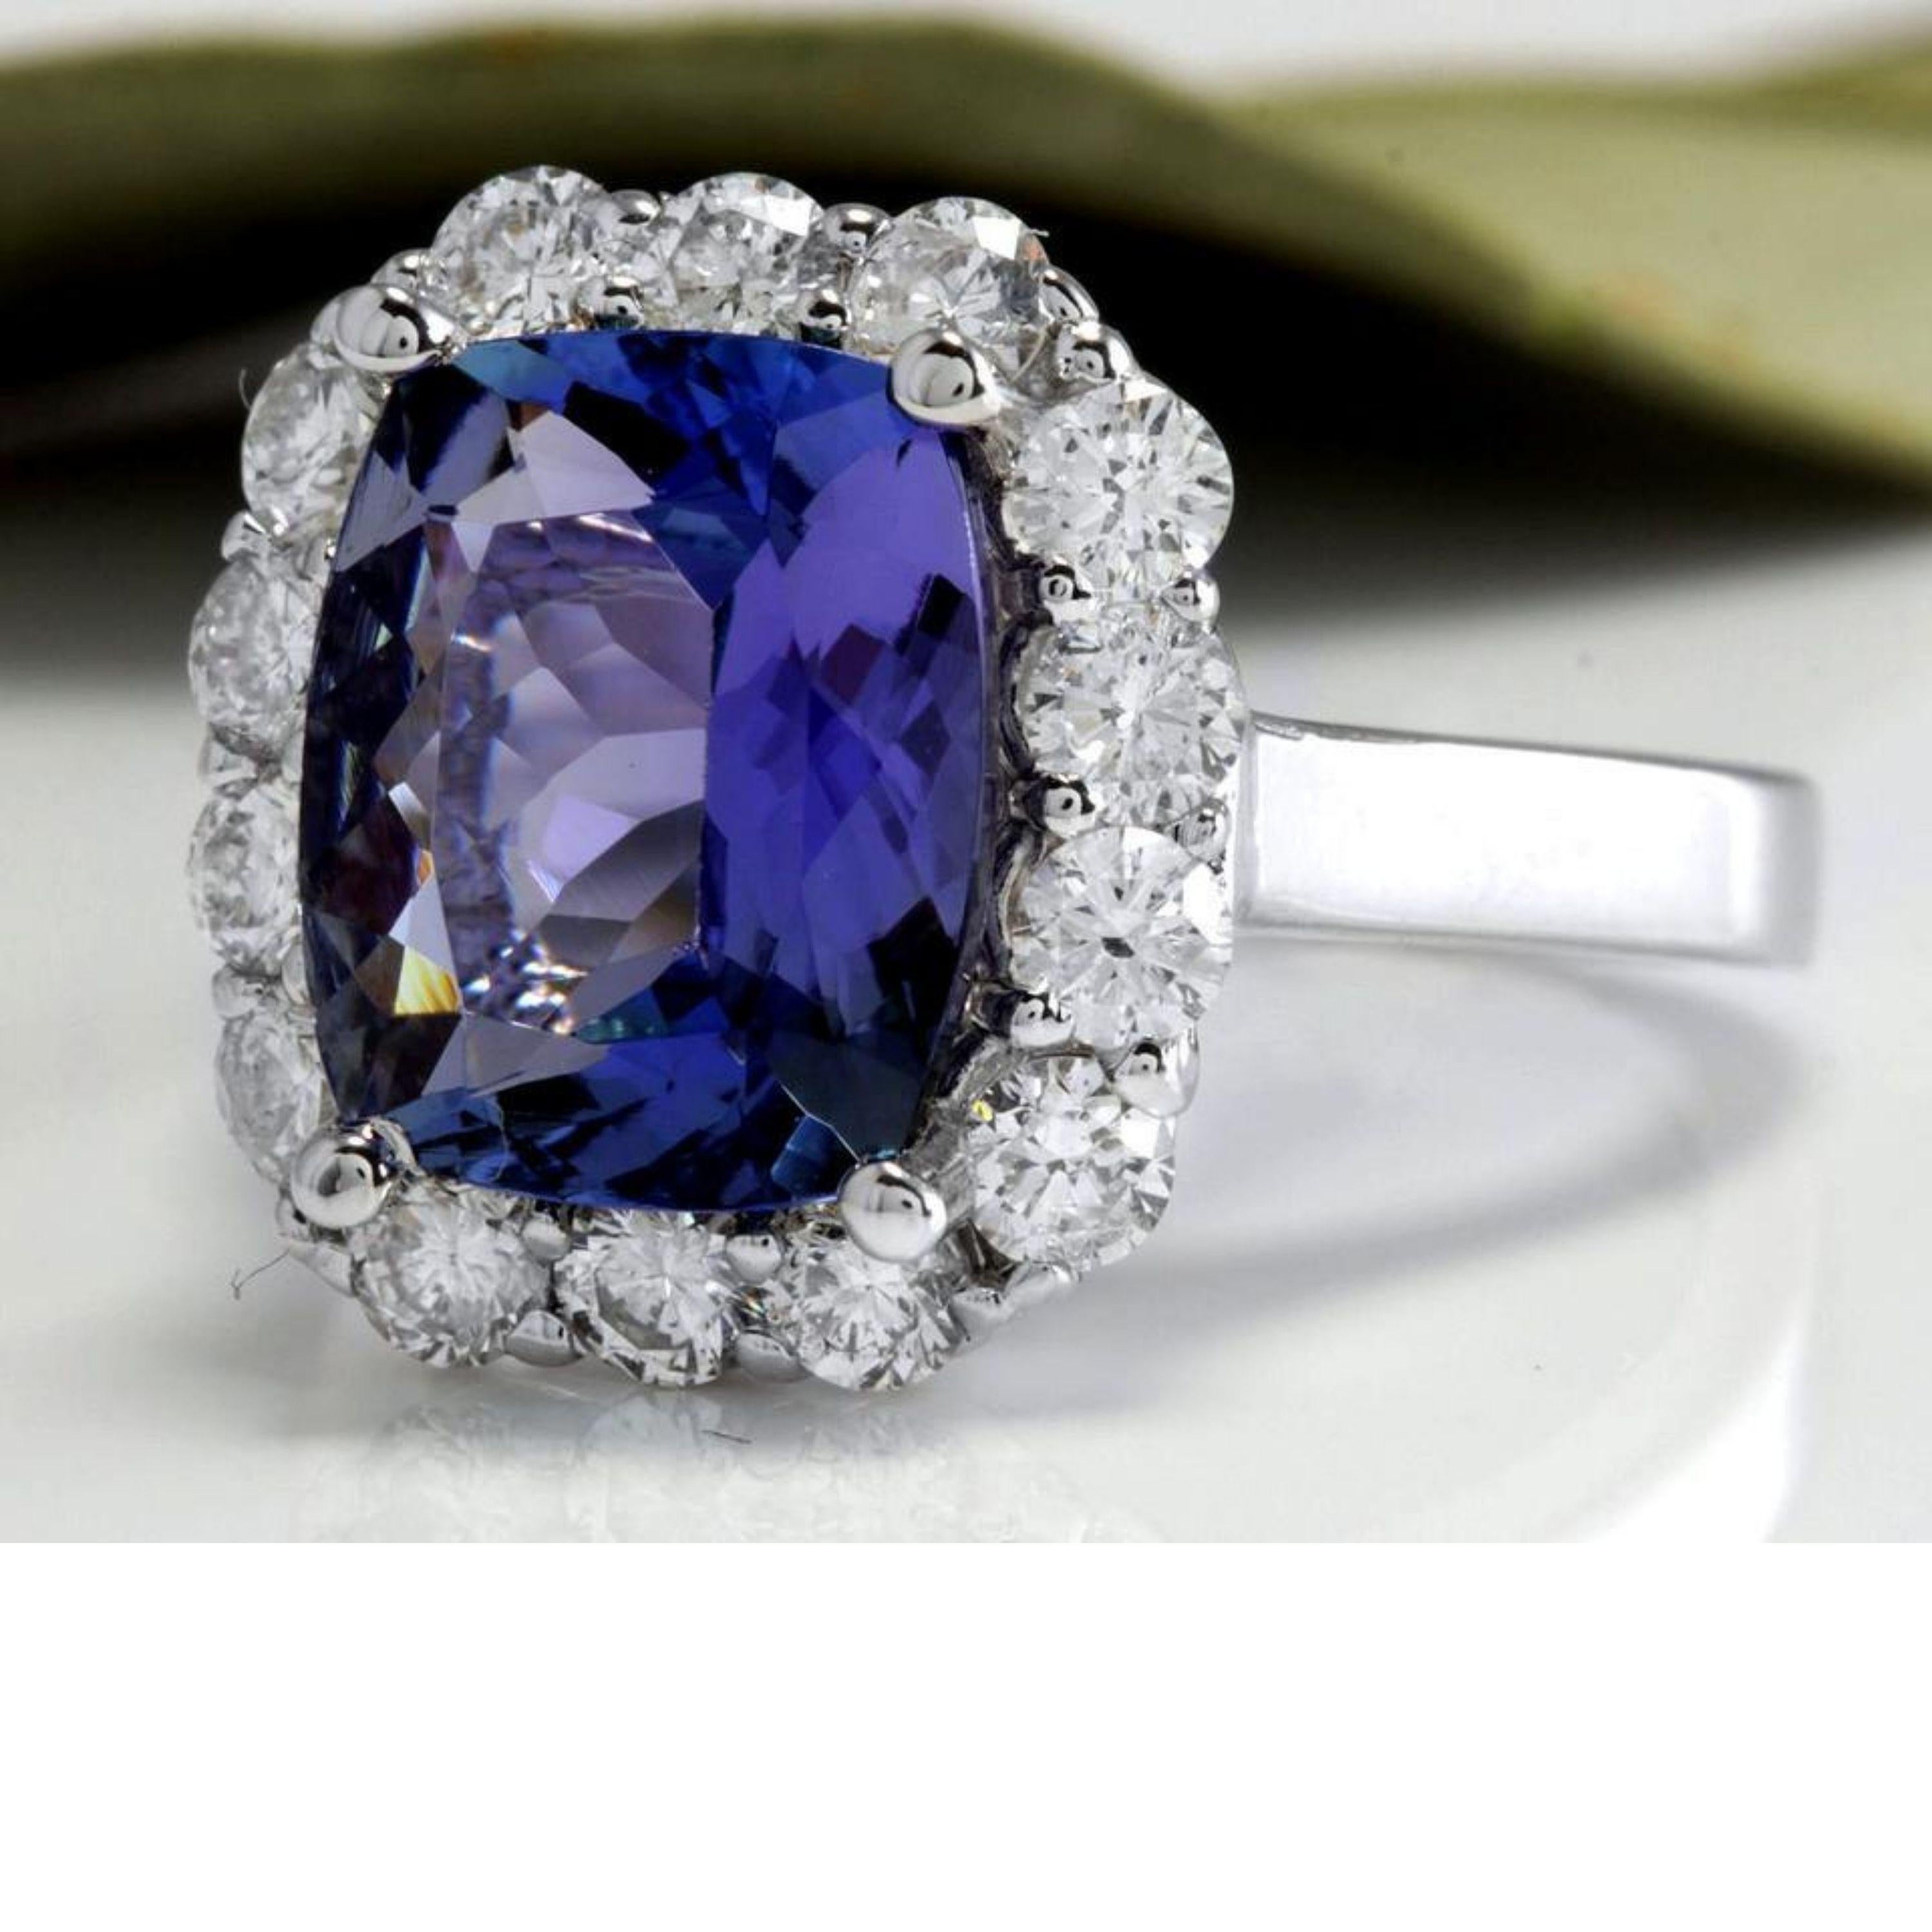 5.65 Carats Natural Very Nice Looking Tanzanite and Diamond 14K Solid White Gold Ring

Total Natural Oval Cut Tanzanite Weight is: Approx. 4.65 Carats

Tanzanite Measures: Approx. 11 x 8.06mm

Natural Round Diamonds Weight: Approx. 1.00 Carats